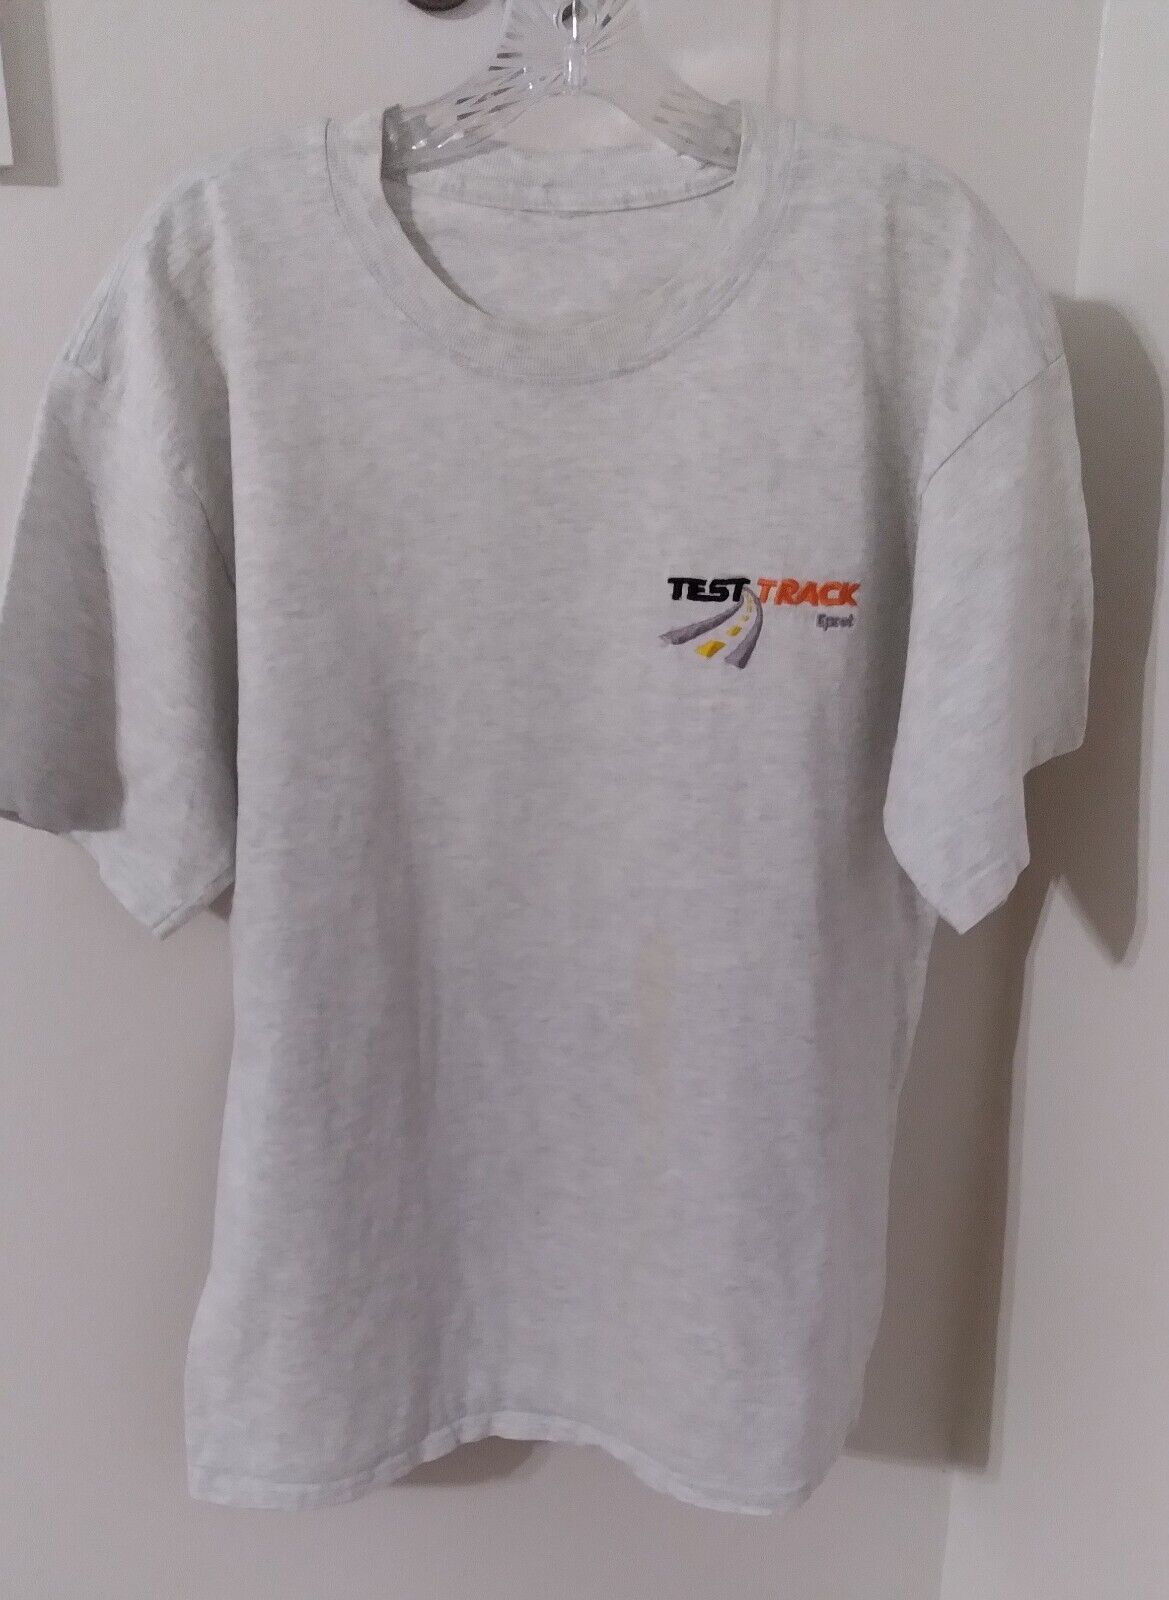 Extremely Rare Disney's Epcot Test & Adjust Crew T-Shirt Pre-owned (Large)